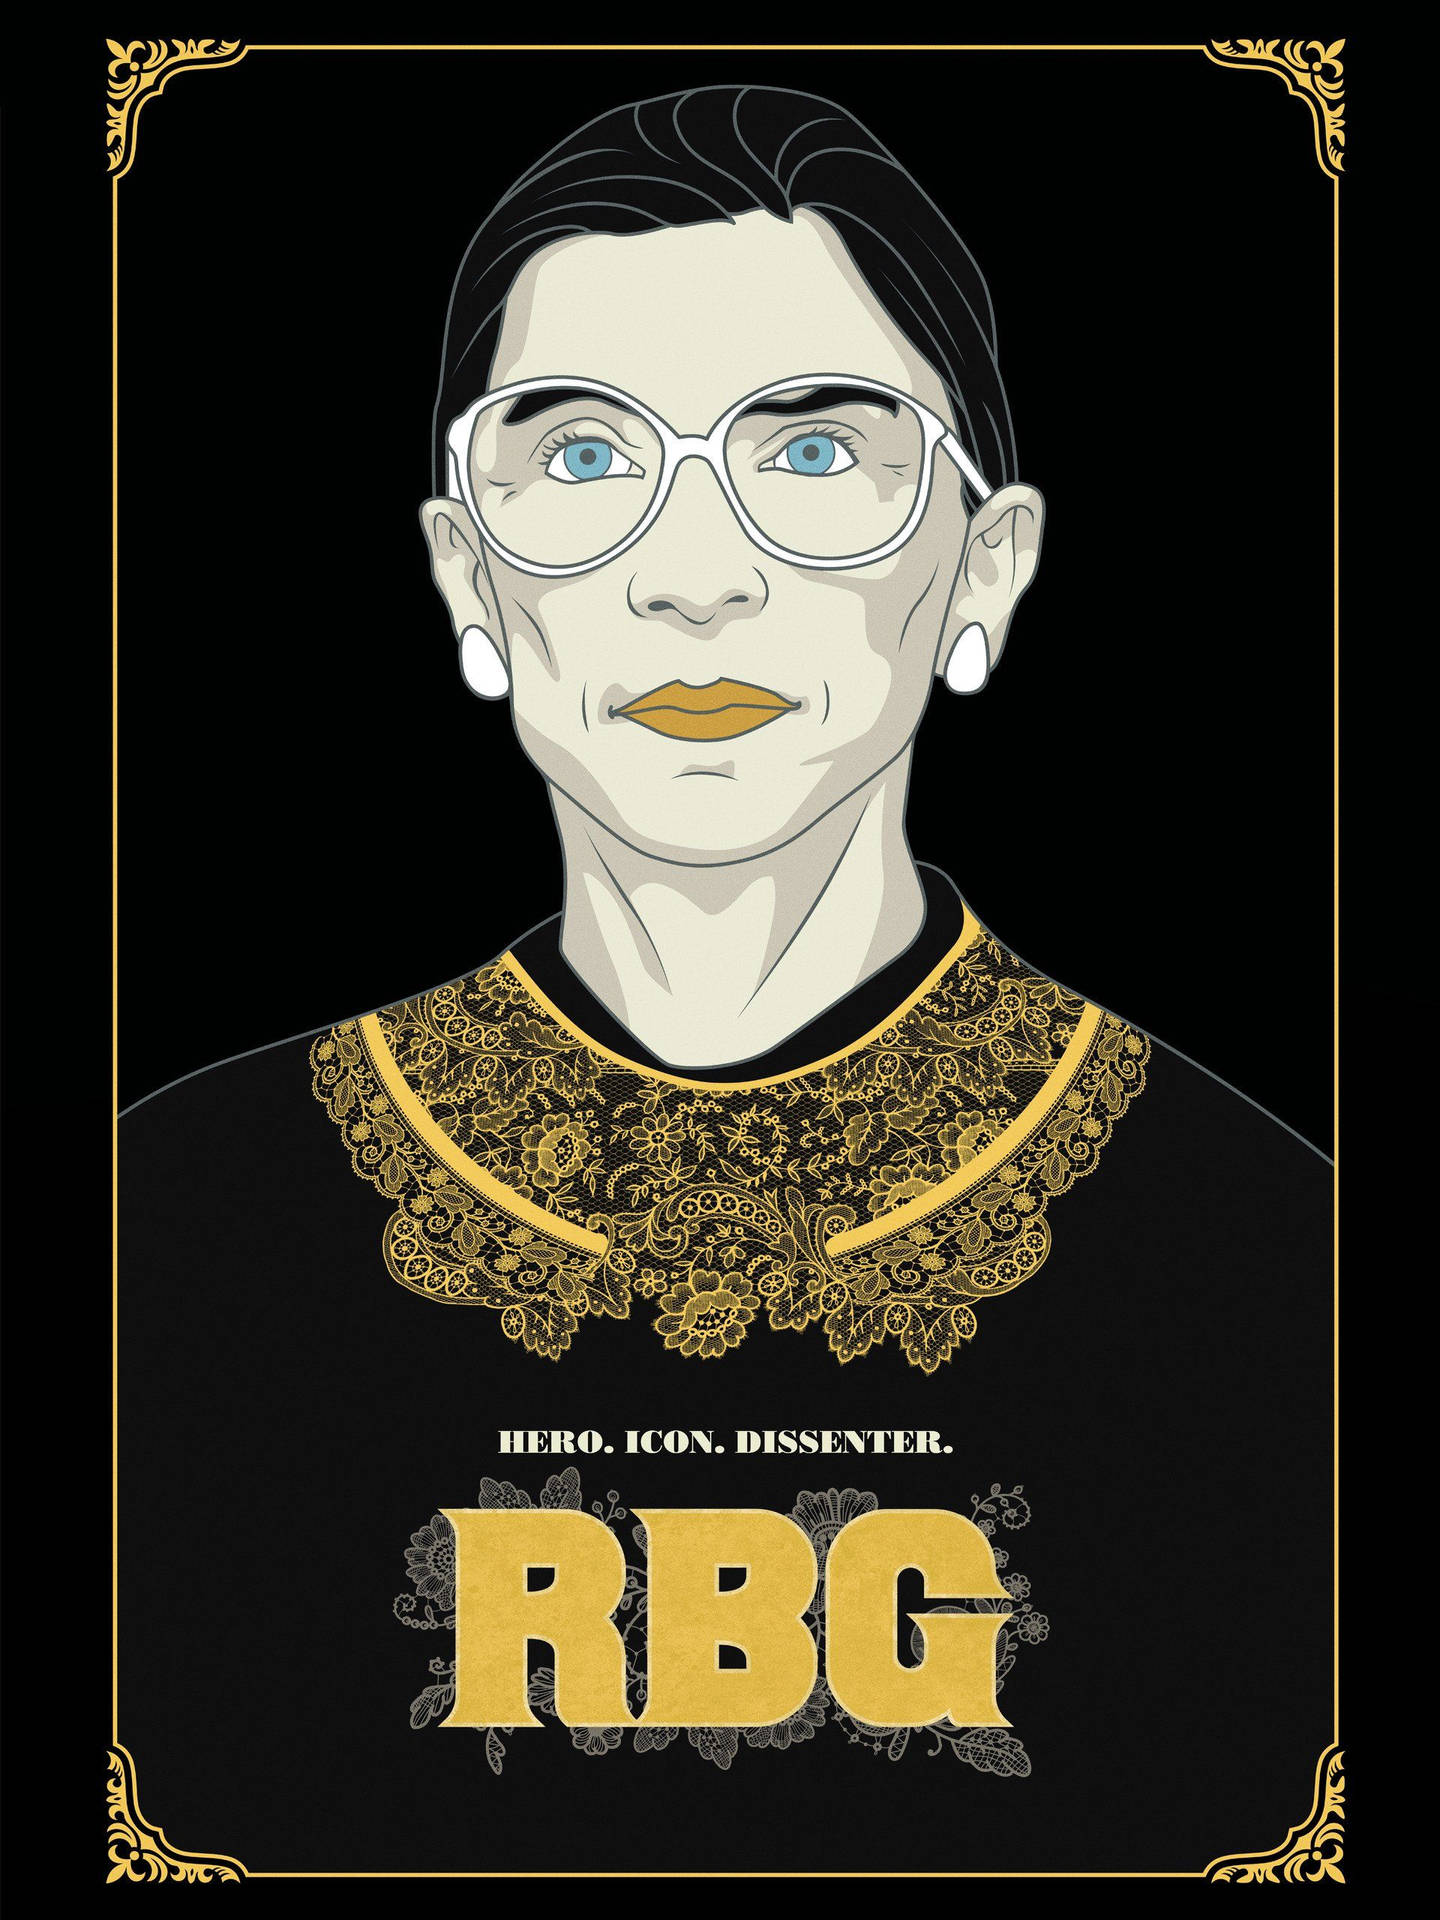 Justice Ruth Bader Ginsburg's Vector Art Portrait